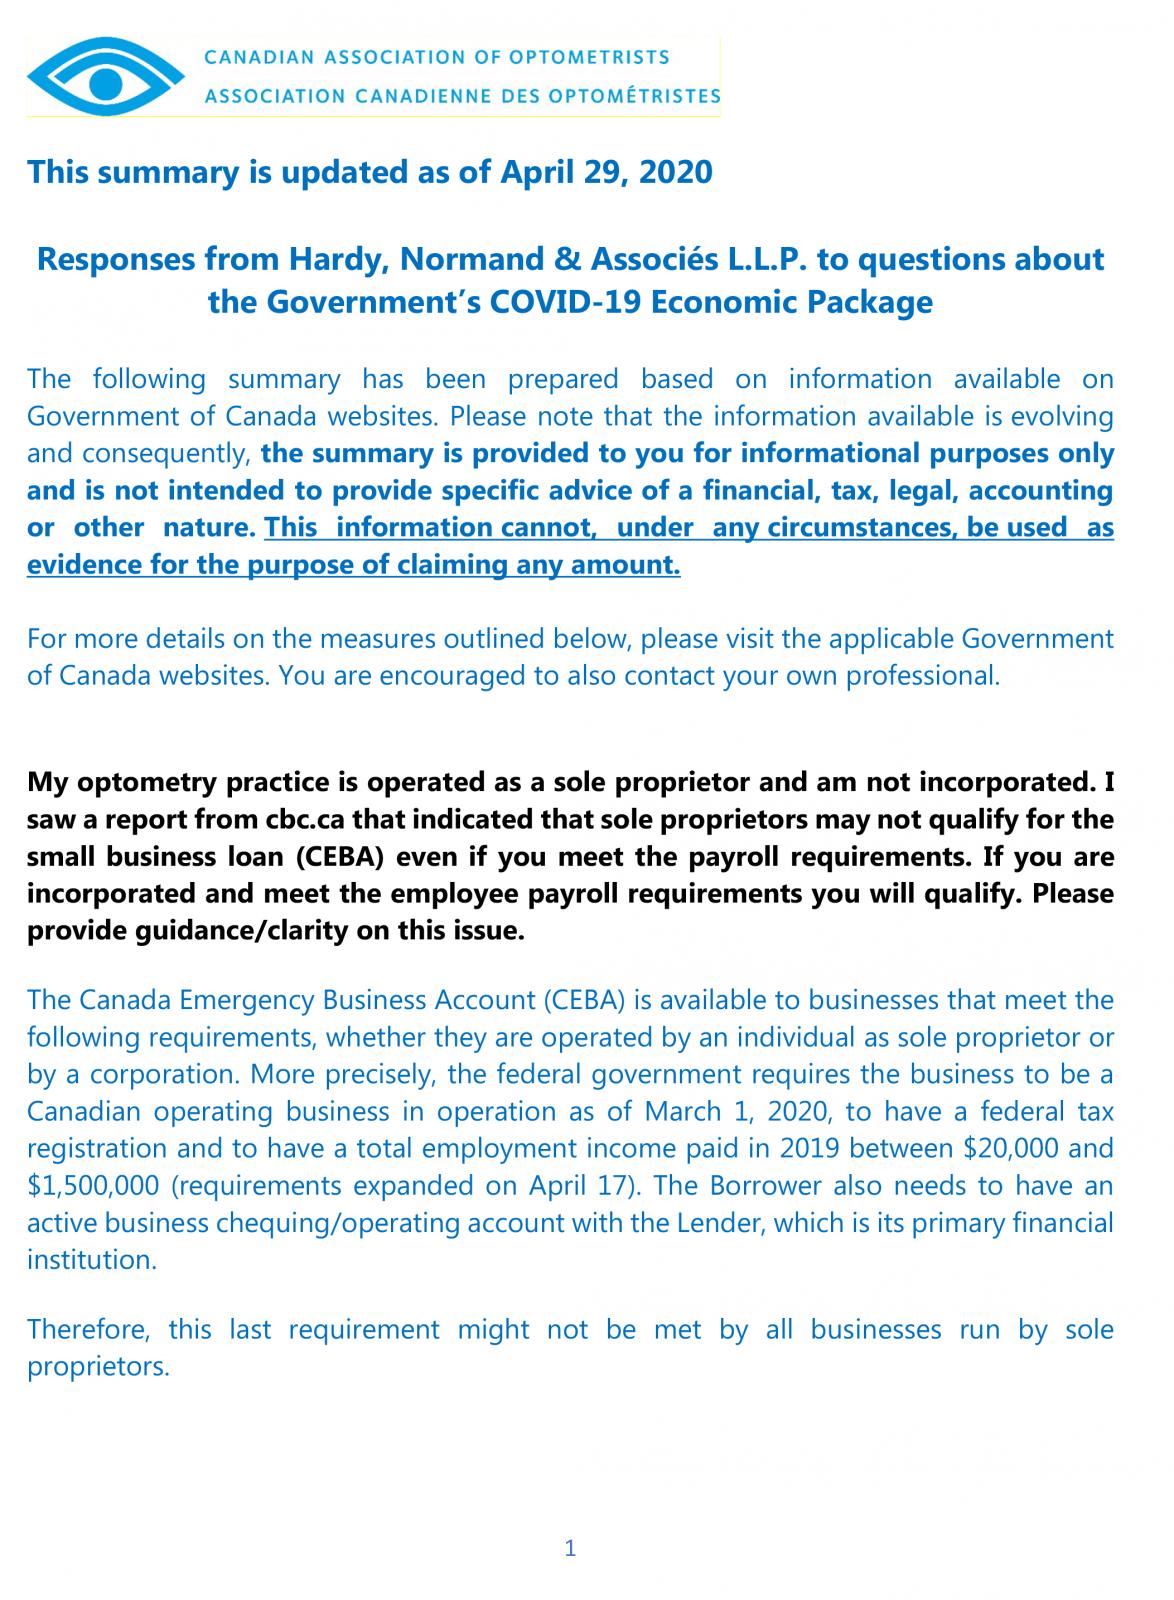 Responses from Hardy, Normand & Associés L.L.P. to questions about the Government’s COVID-19 Economic Package (updated April 29)